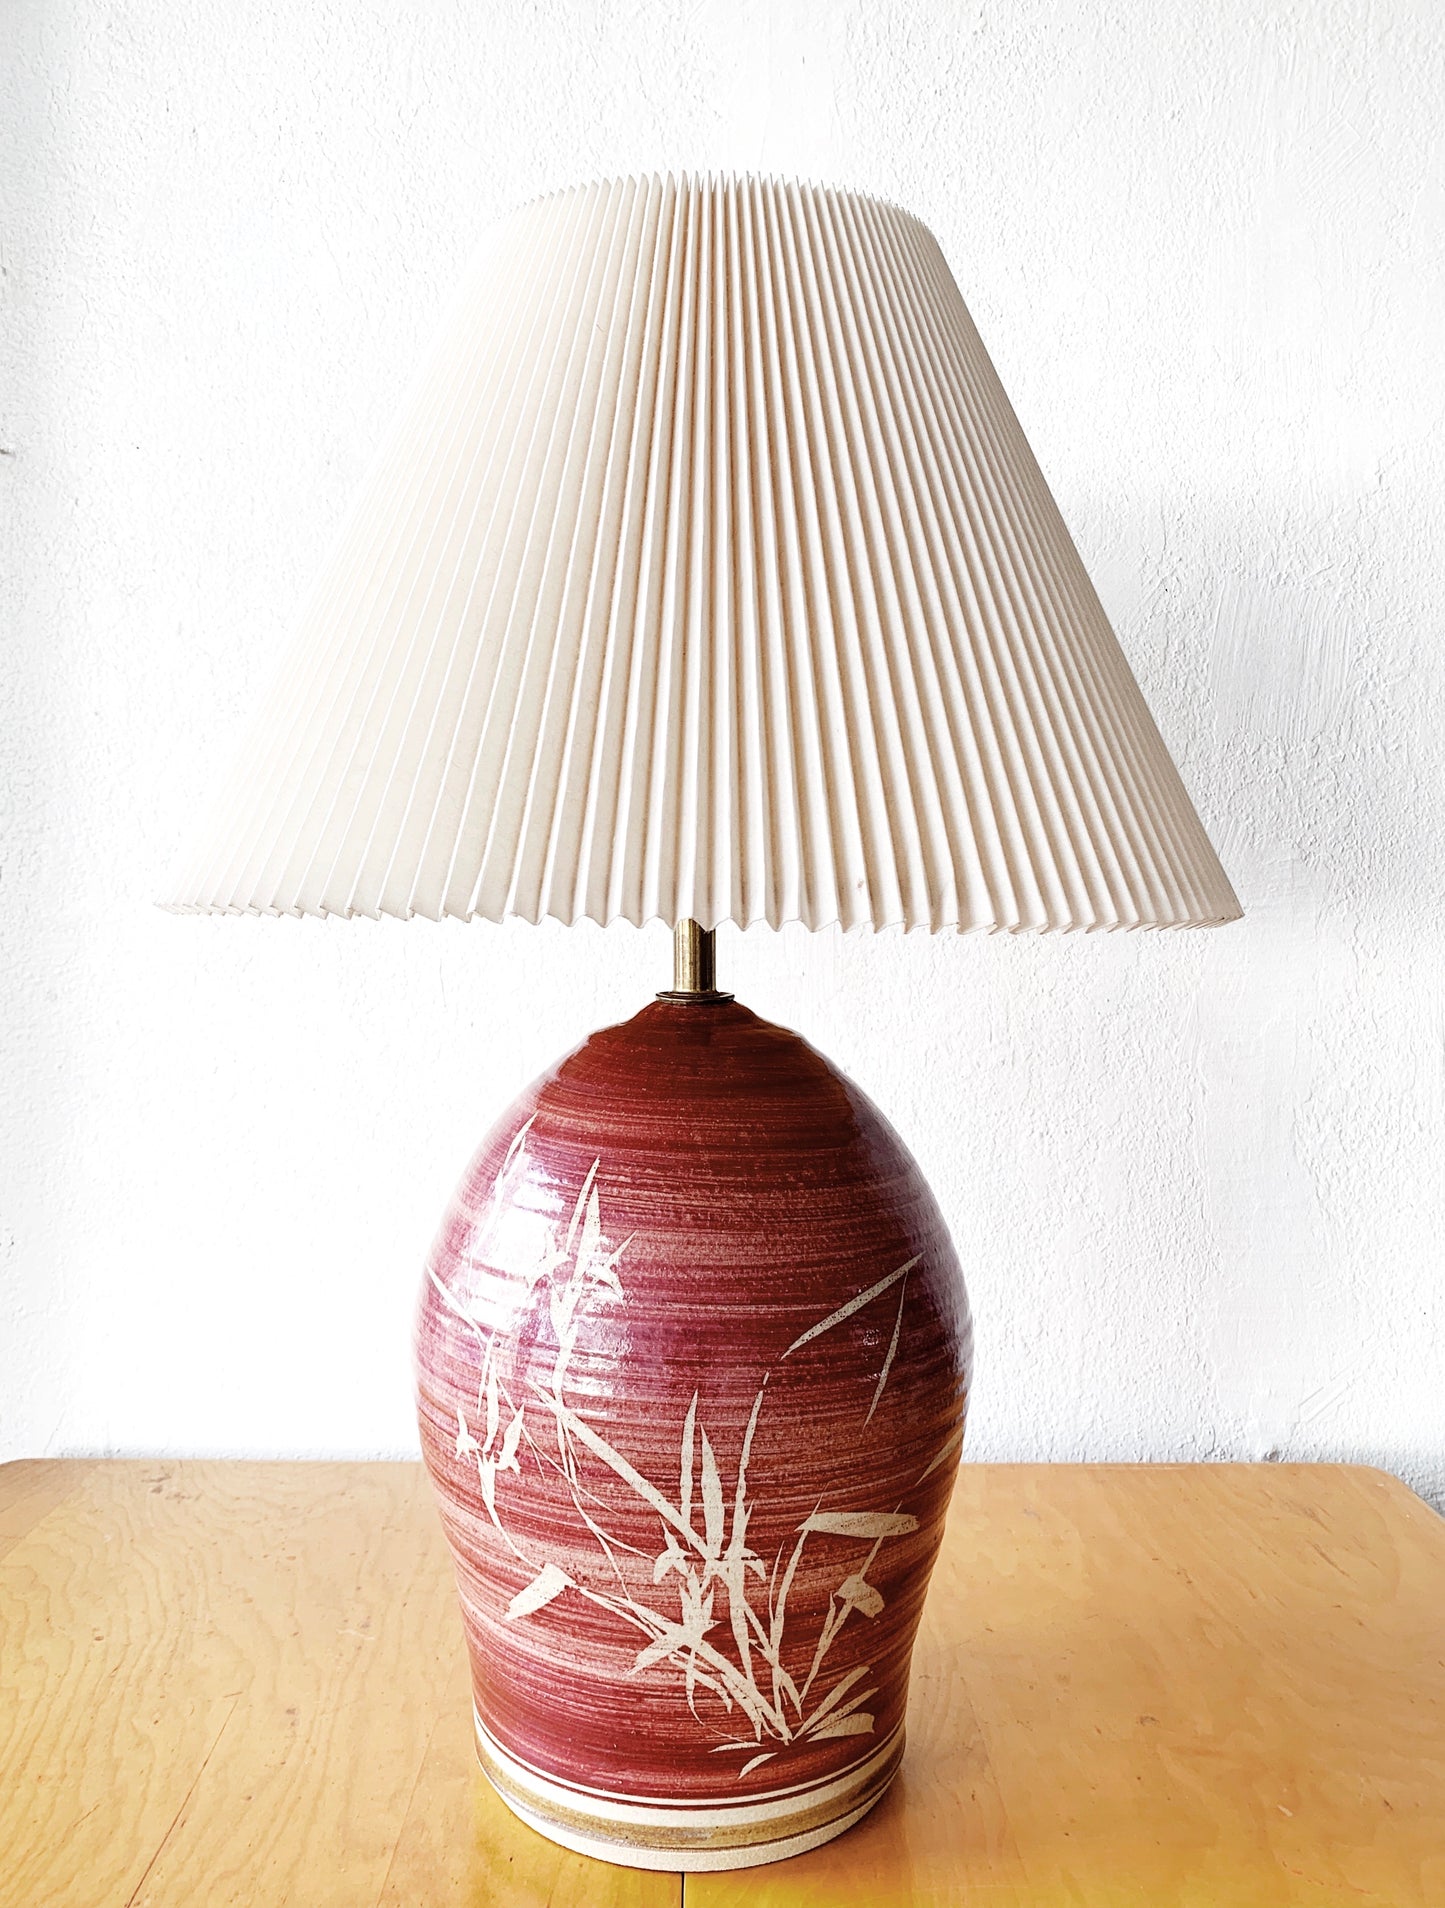 Large Vintage Ceramic Lamp with Pleated Shade